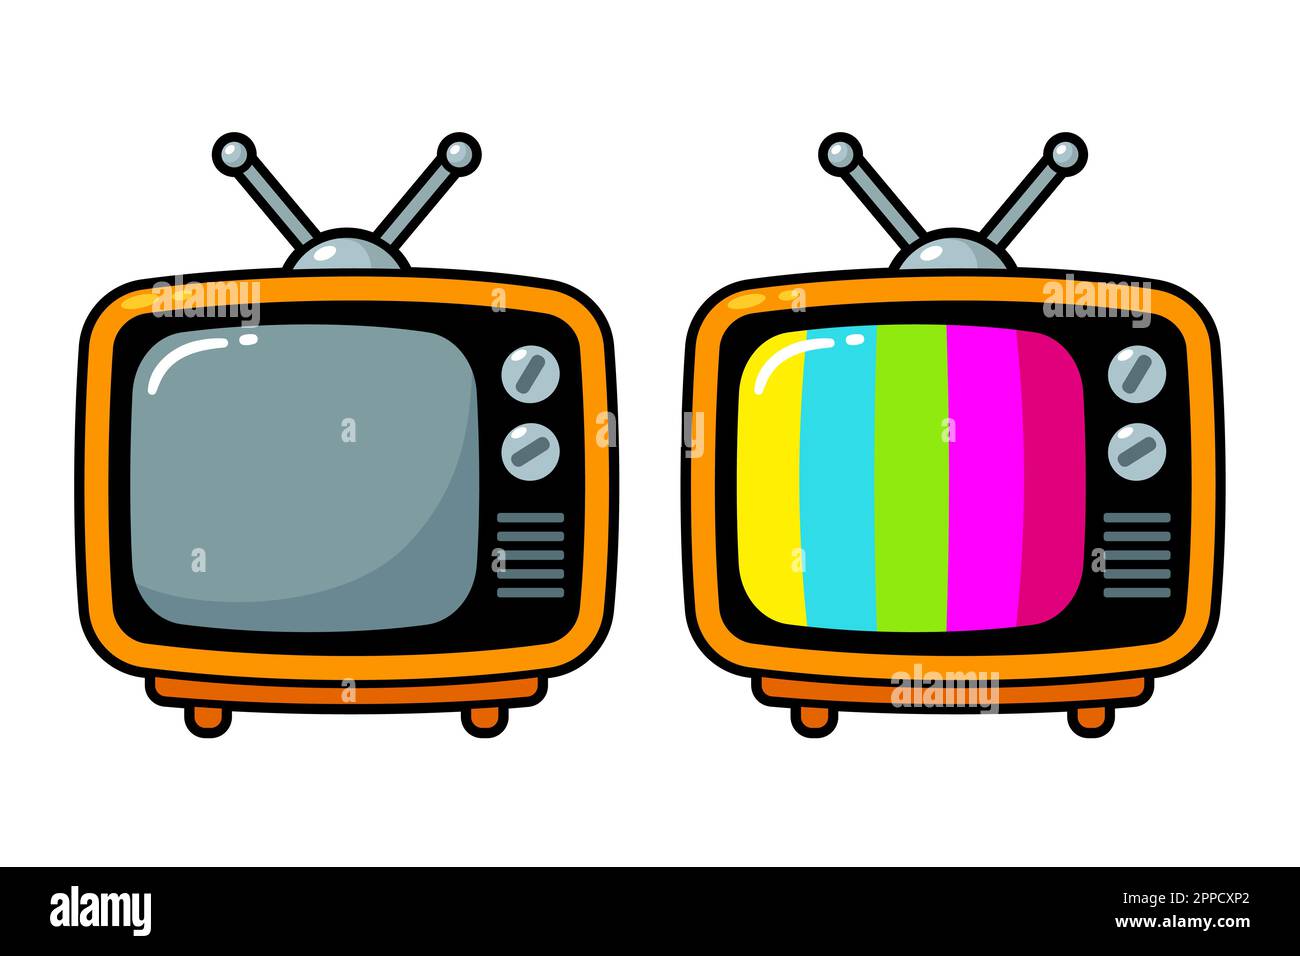 Vintage television set in cute cartoon style. No signal, colored stripes (TV test pattern). Vector clip art illustration. Stock Vector